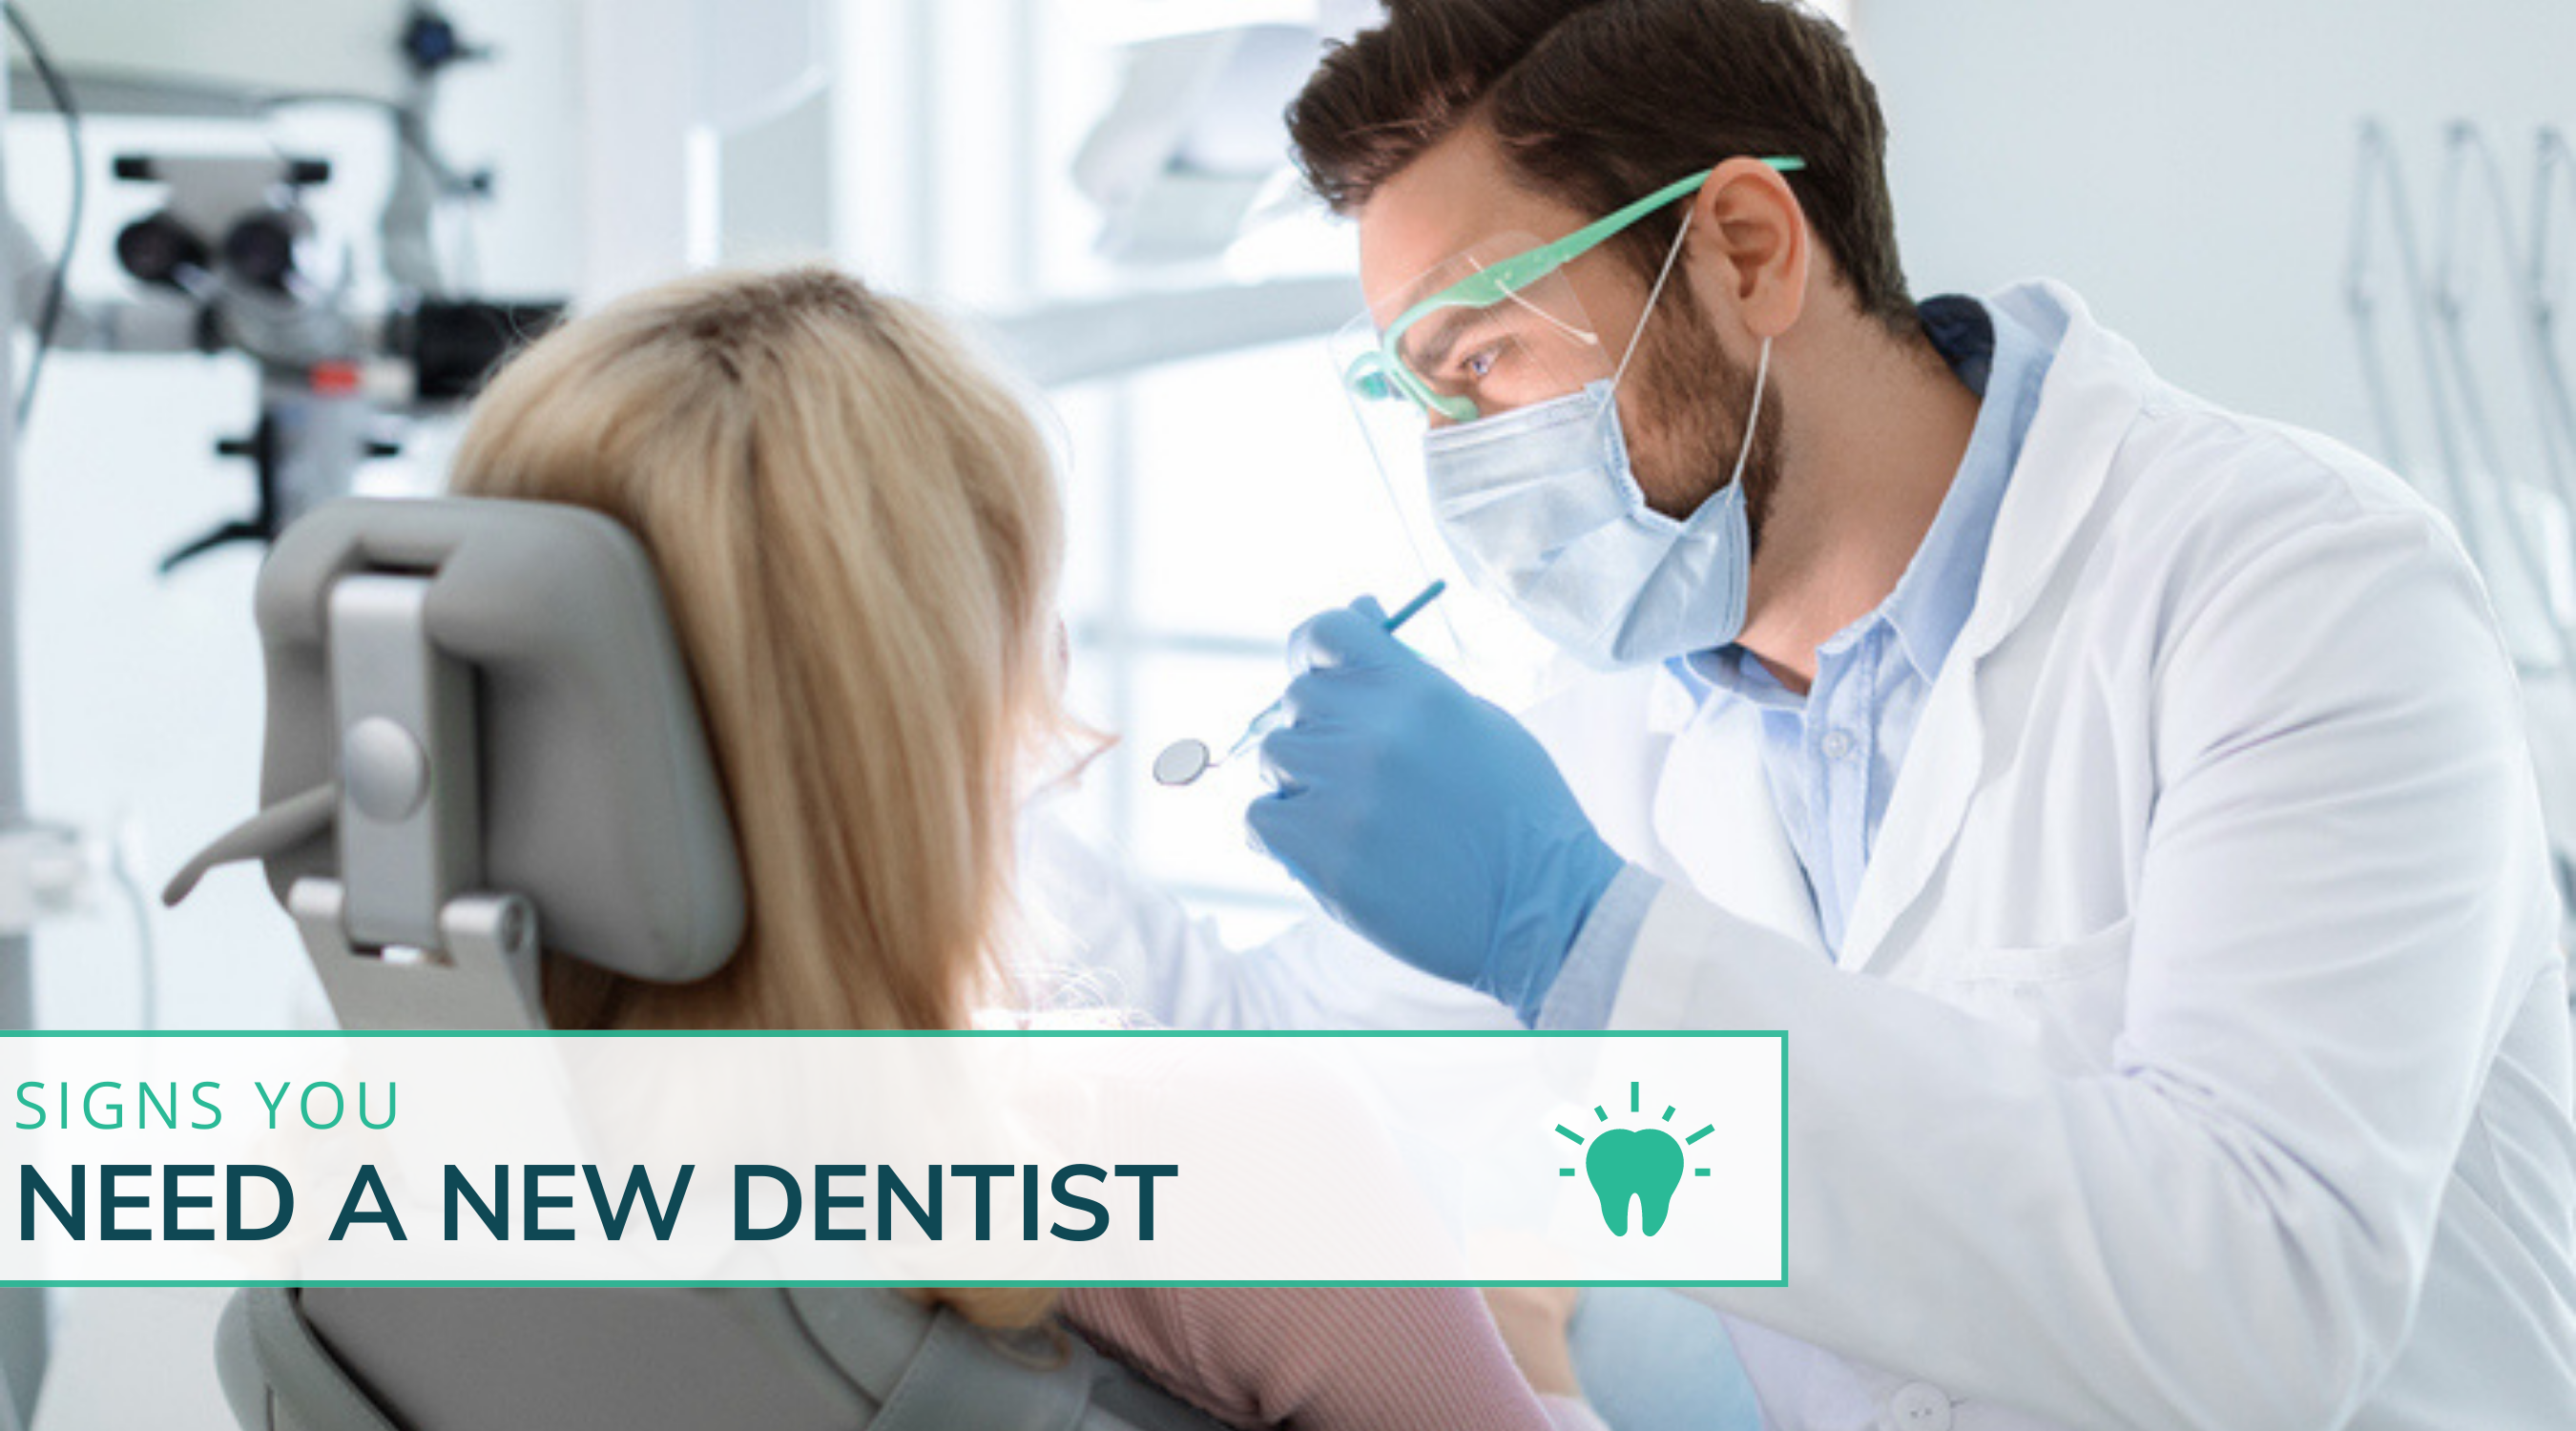 Signs You Need a New Dentist